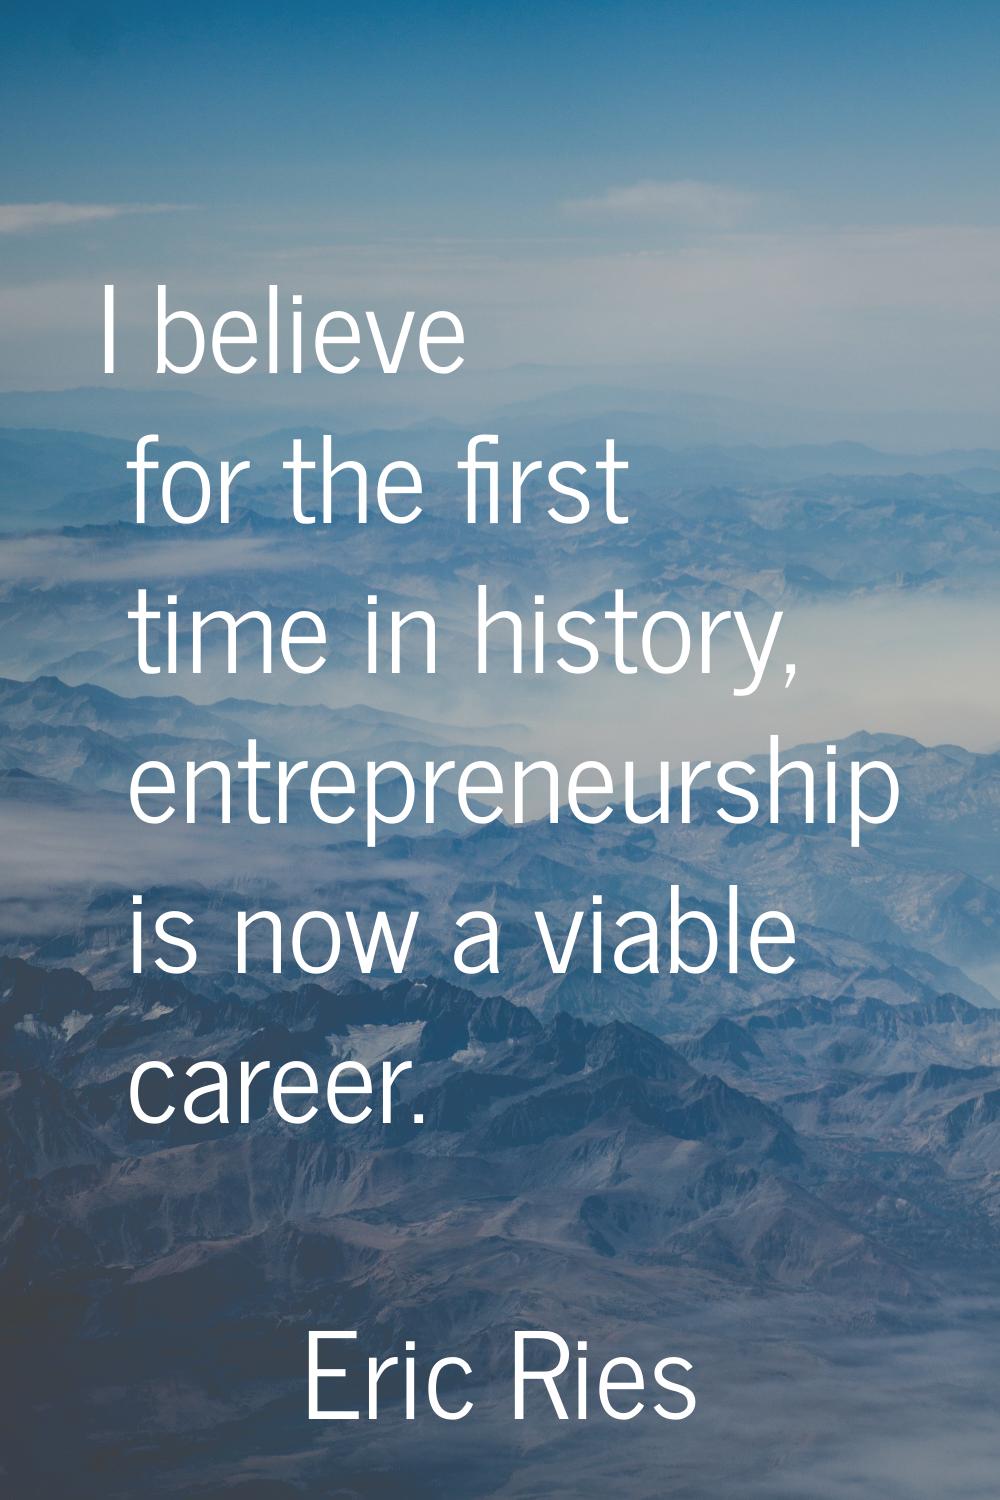 I believe for the first time in history, entrepreneurship is now a viable career.